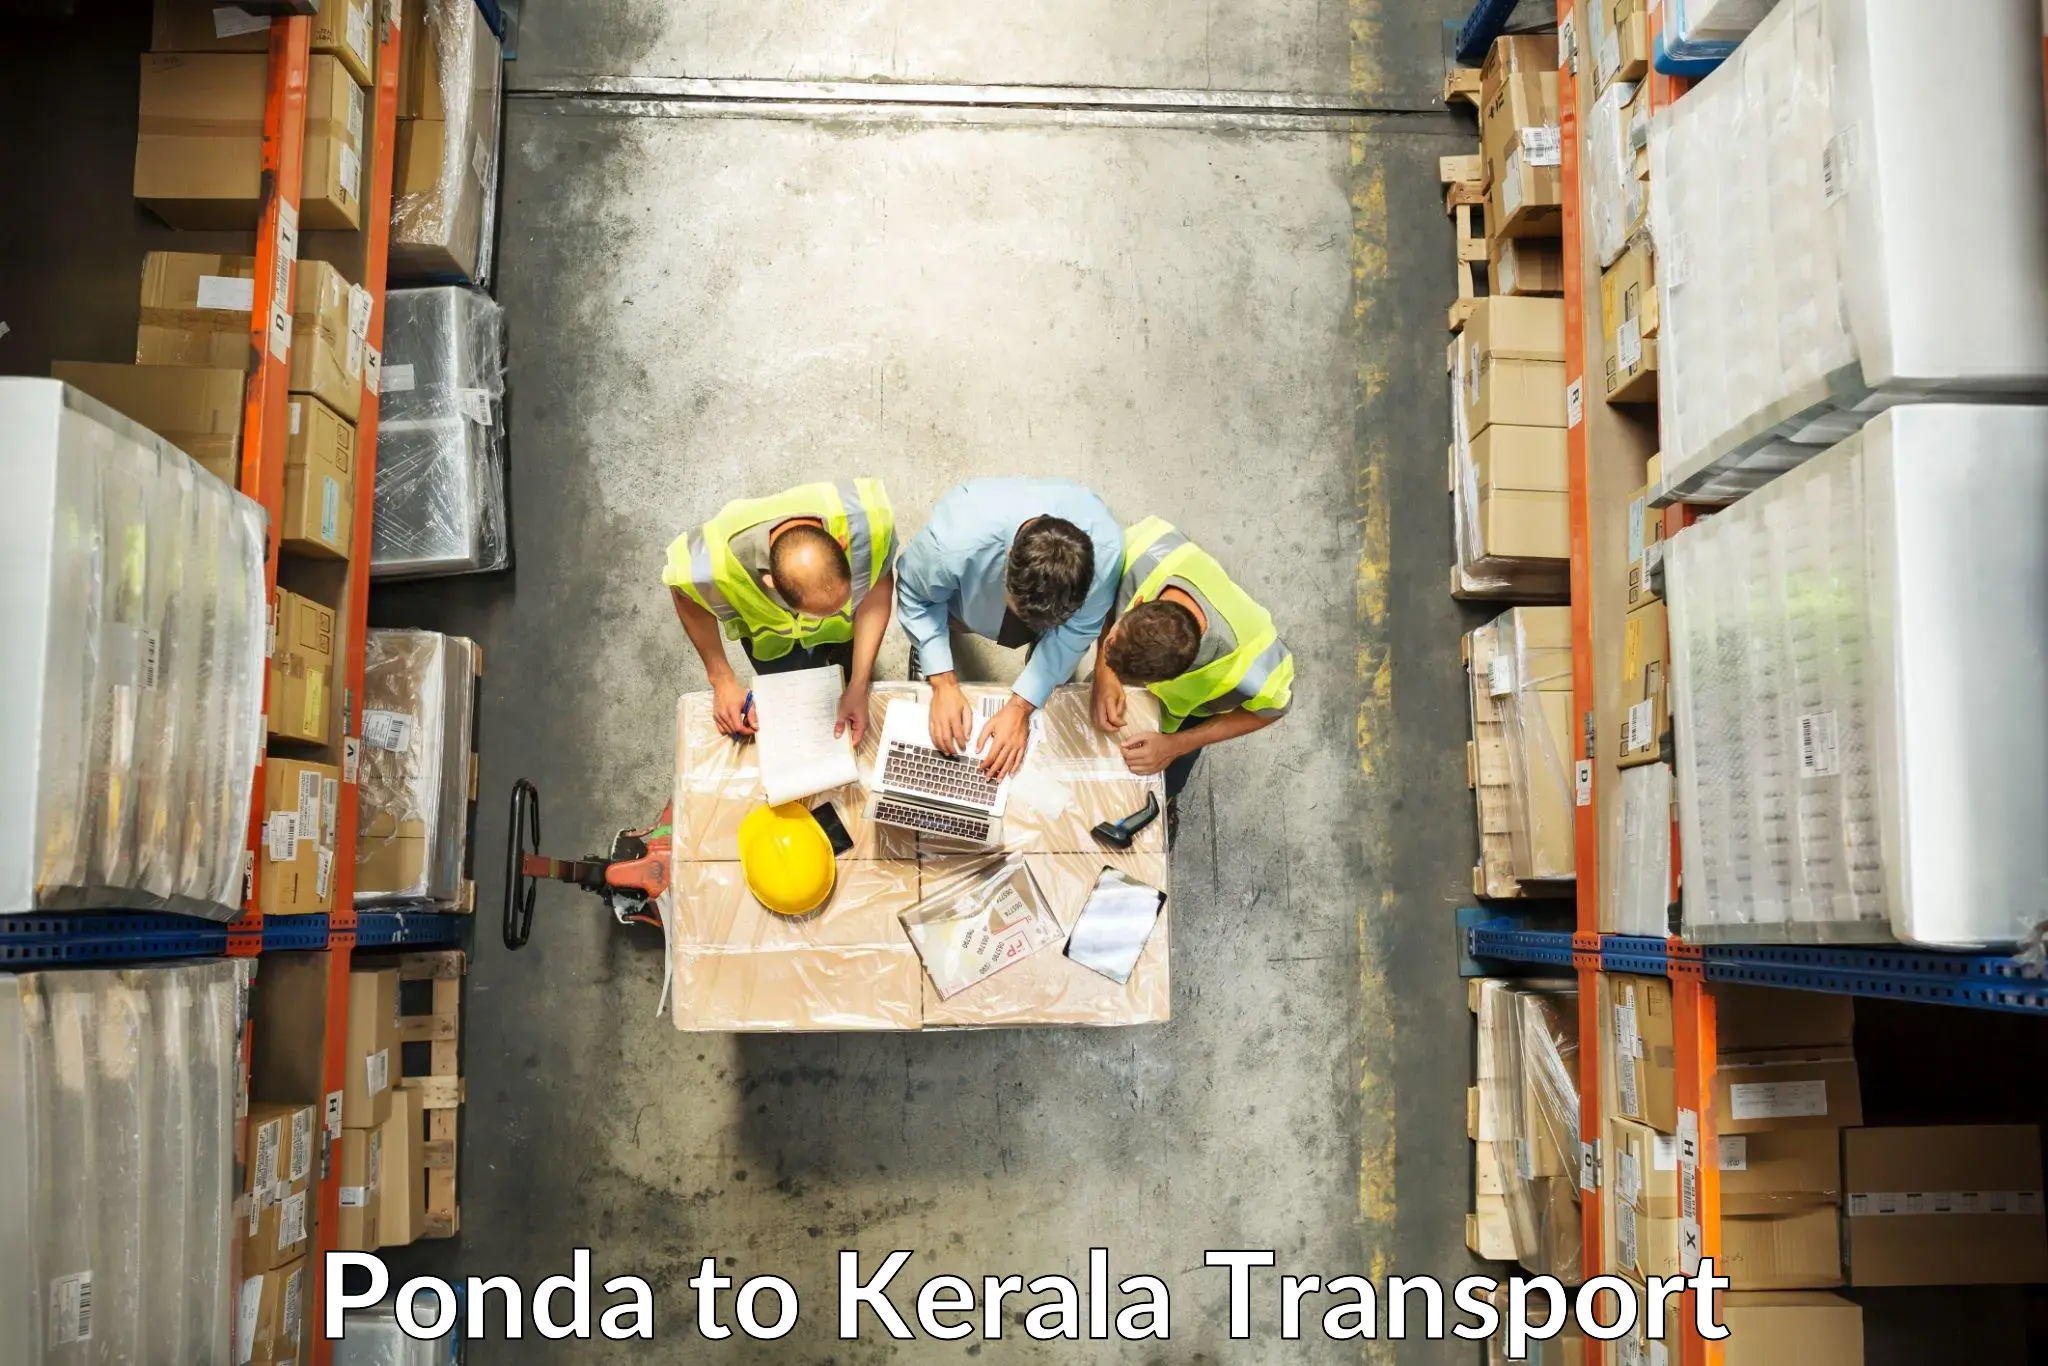 Transport bike from one state to another Ponda to Kannur